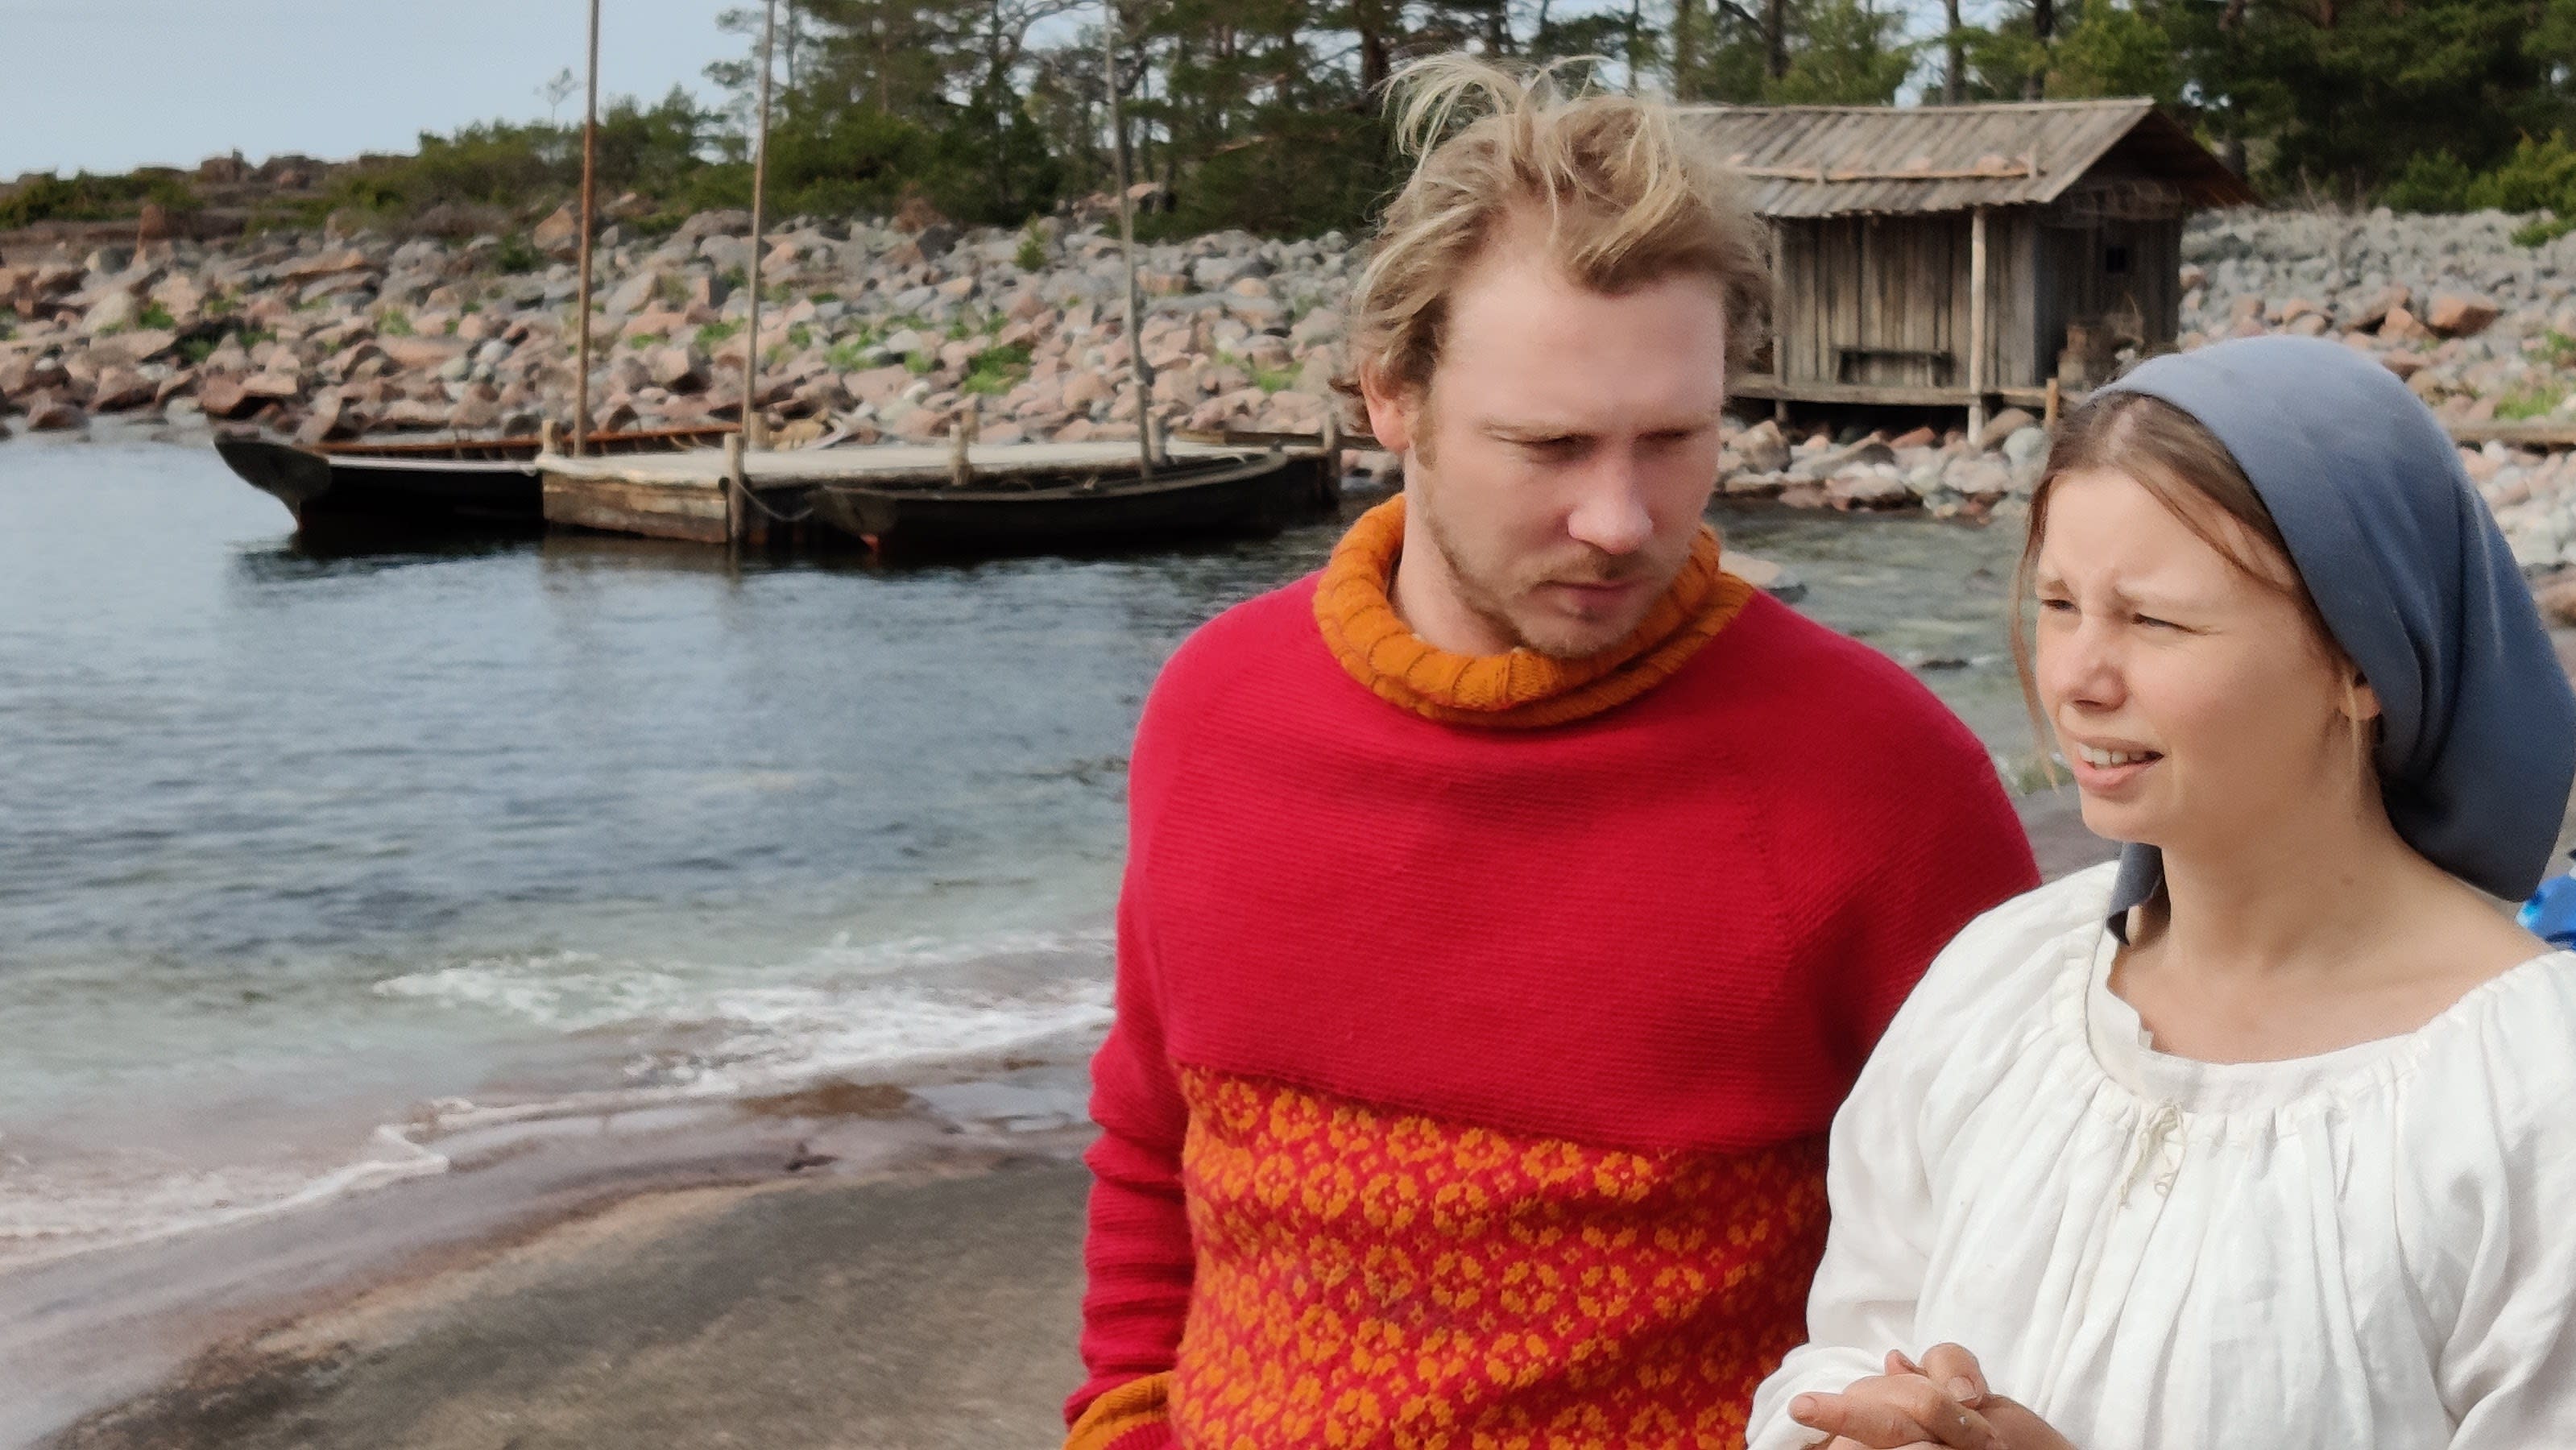 Move over Kaurismäki: Saaridrama will become the most watched domestic film of the 2020s